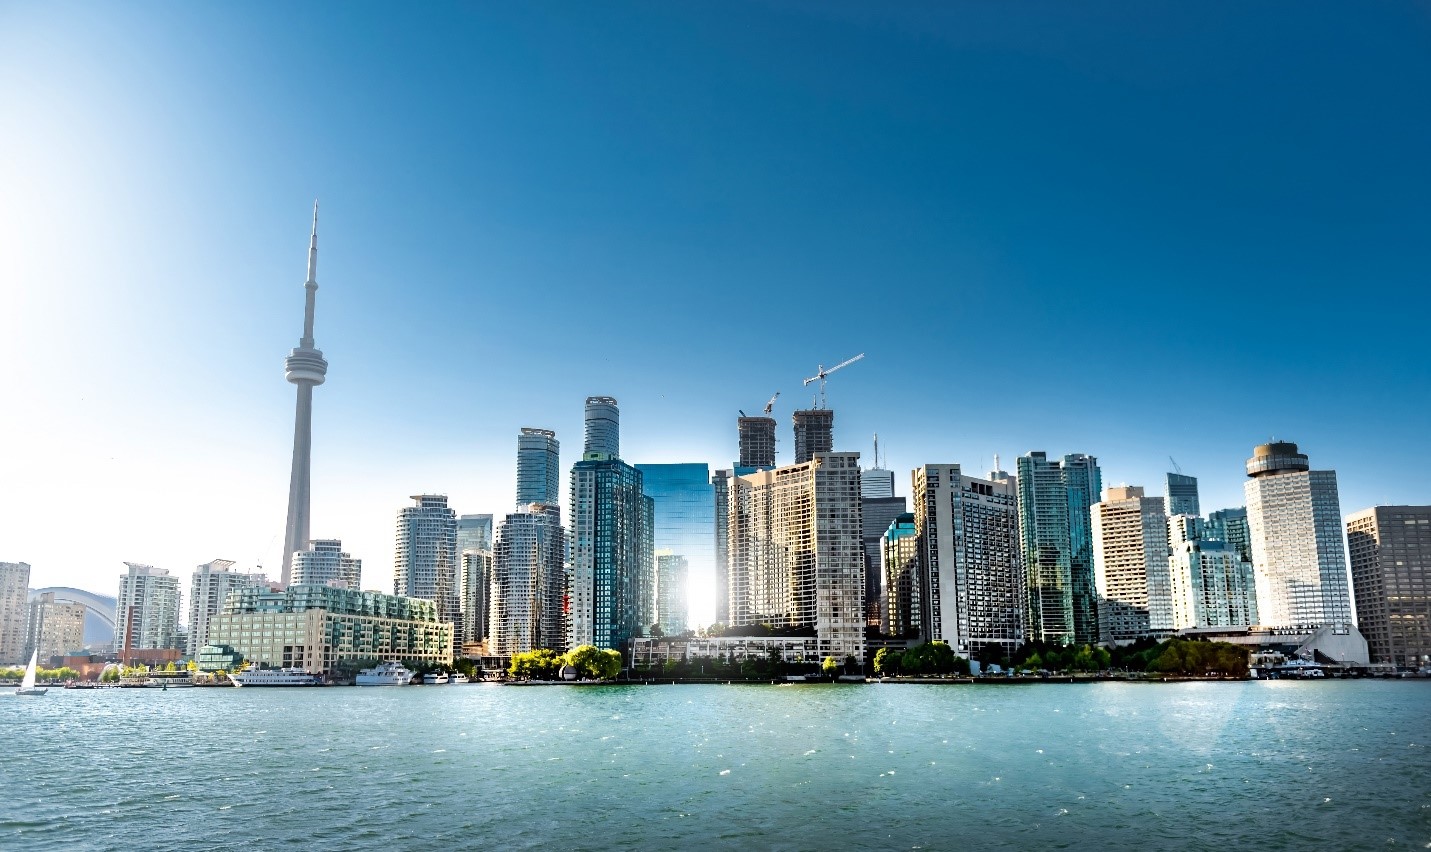 A view of the Toronto skyline, seen from the water.